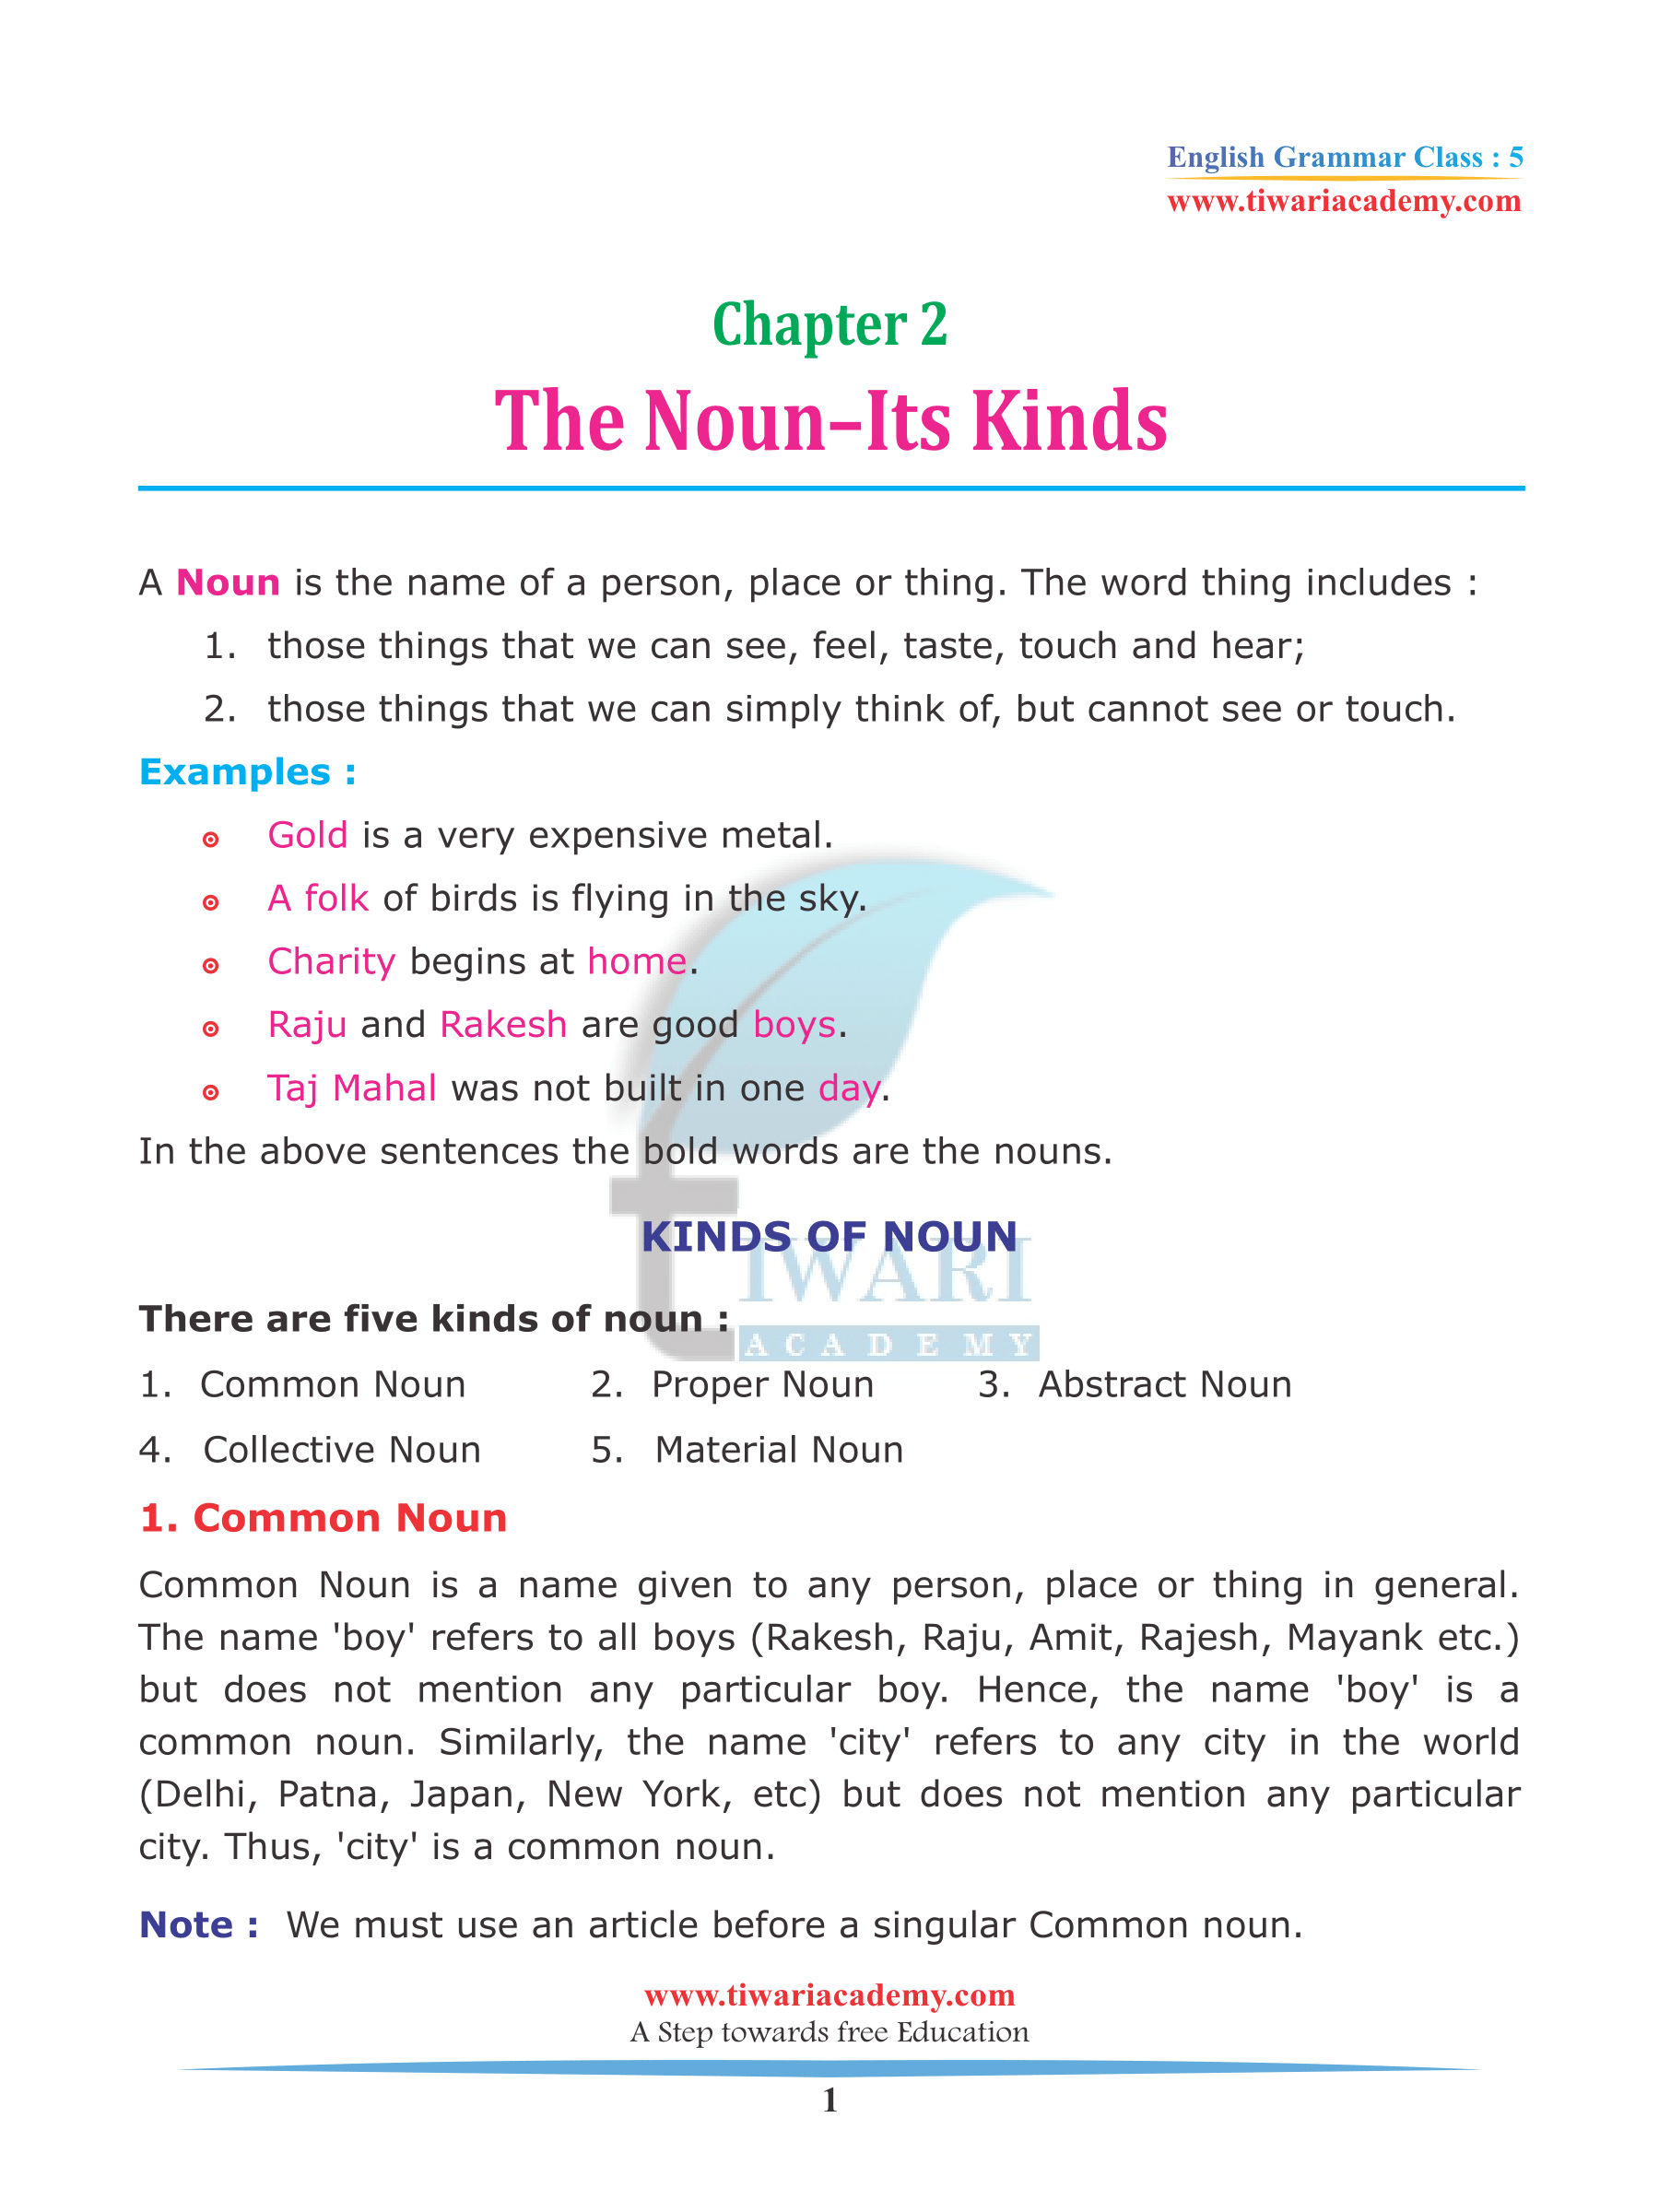 class-5-english-grammar-chapter-2-the-noun-and-its-kinds-for-2022-2023